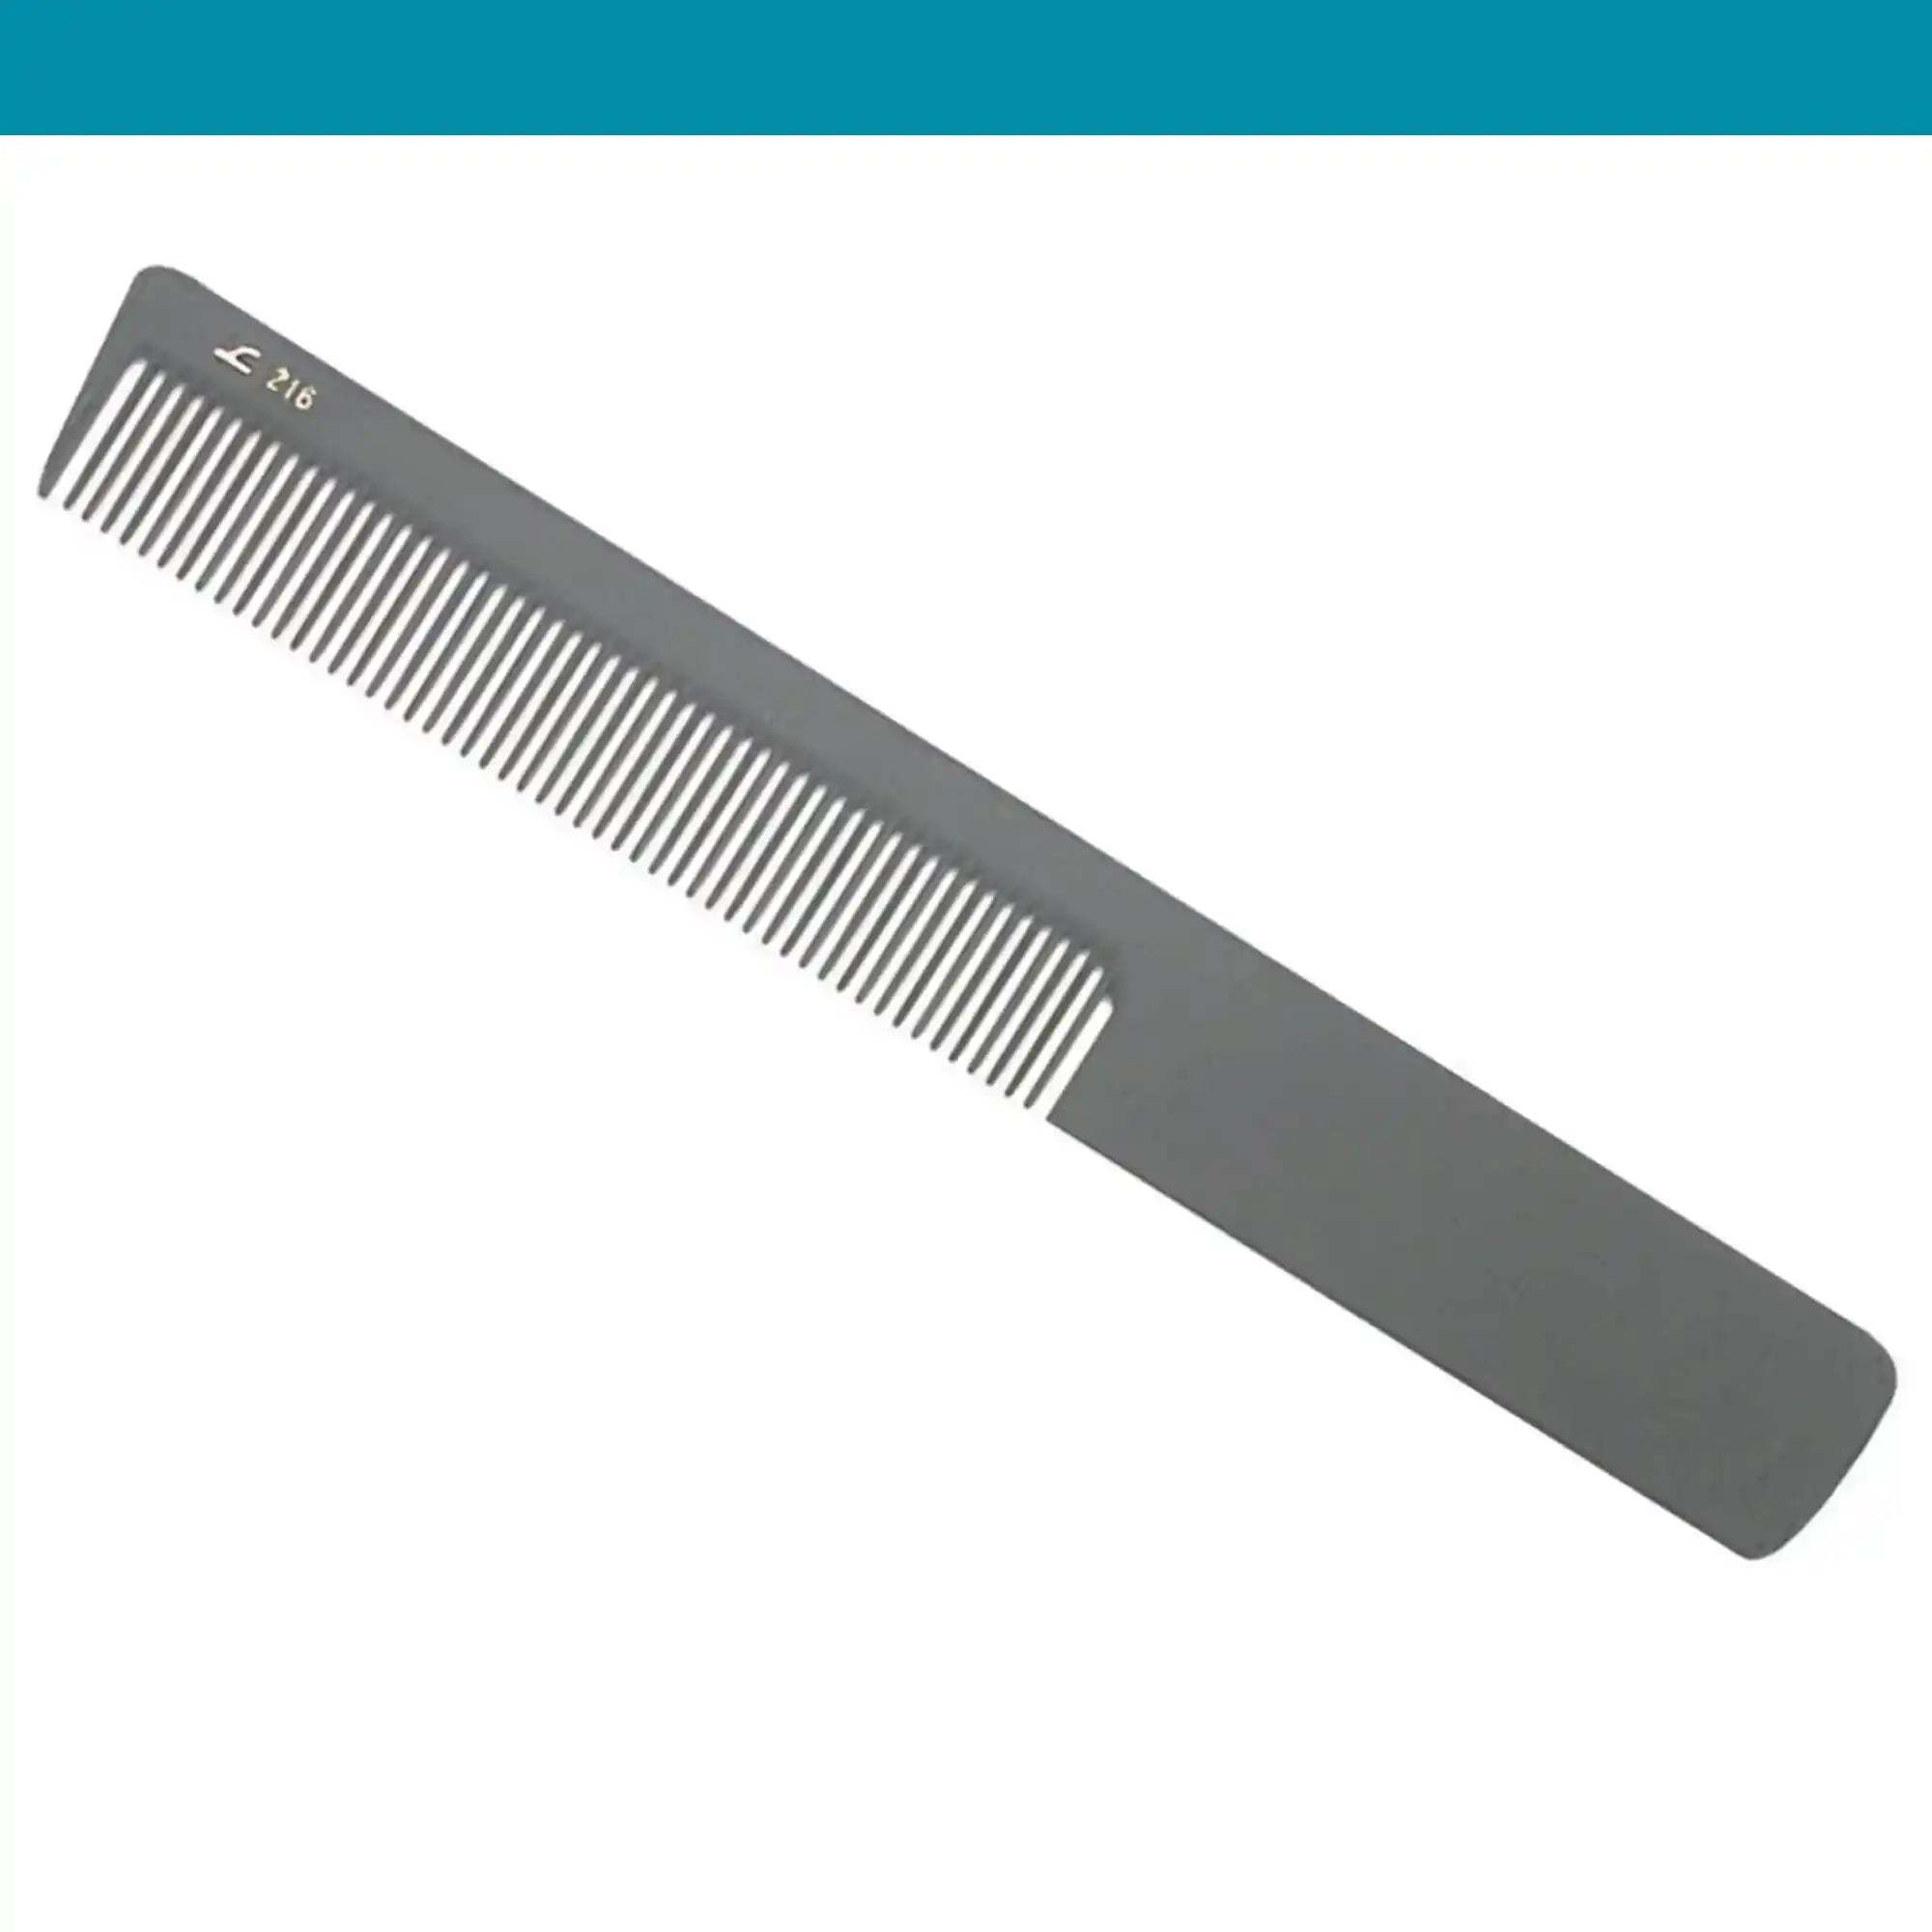 Leader Carbon #216 Cutting Comb 7"